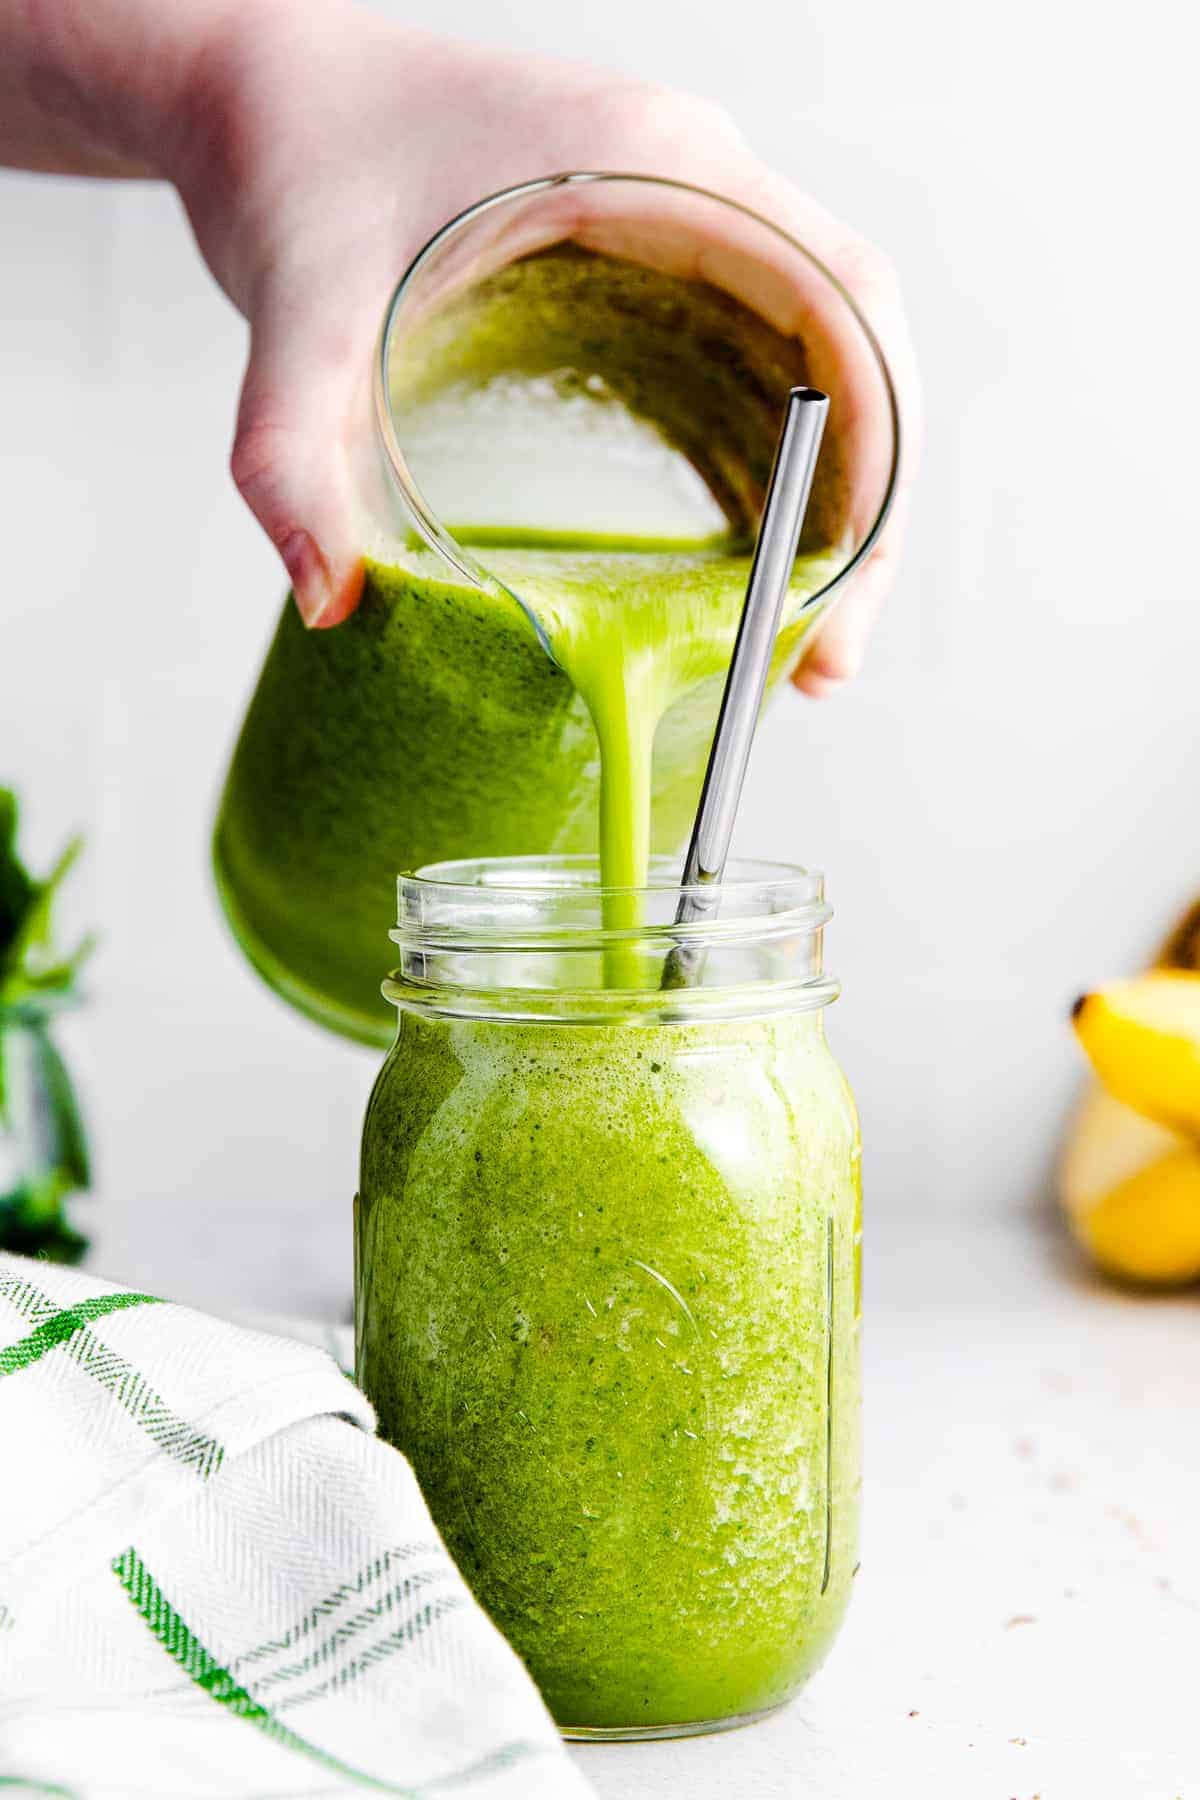 pouring an island green smoothie into a glass jar